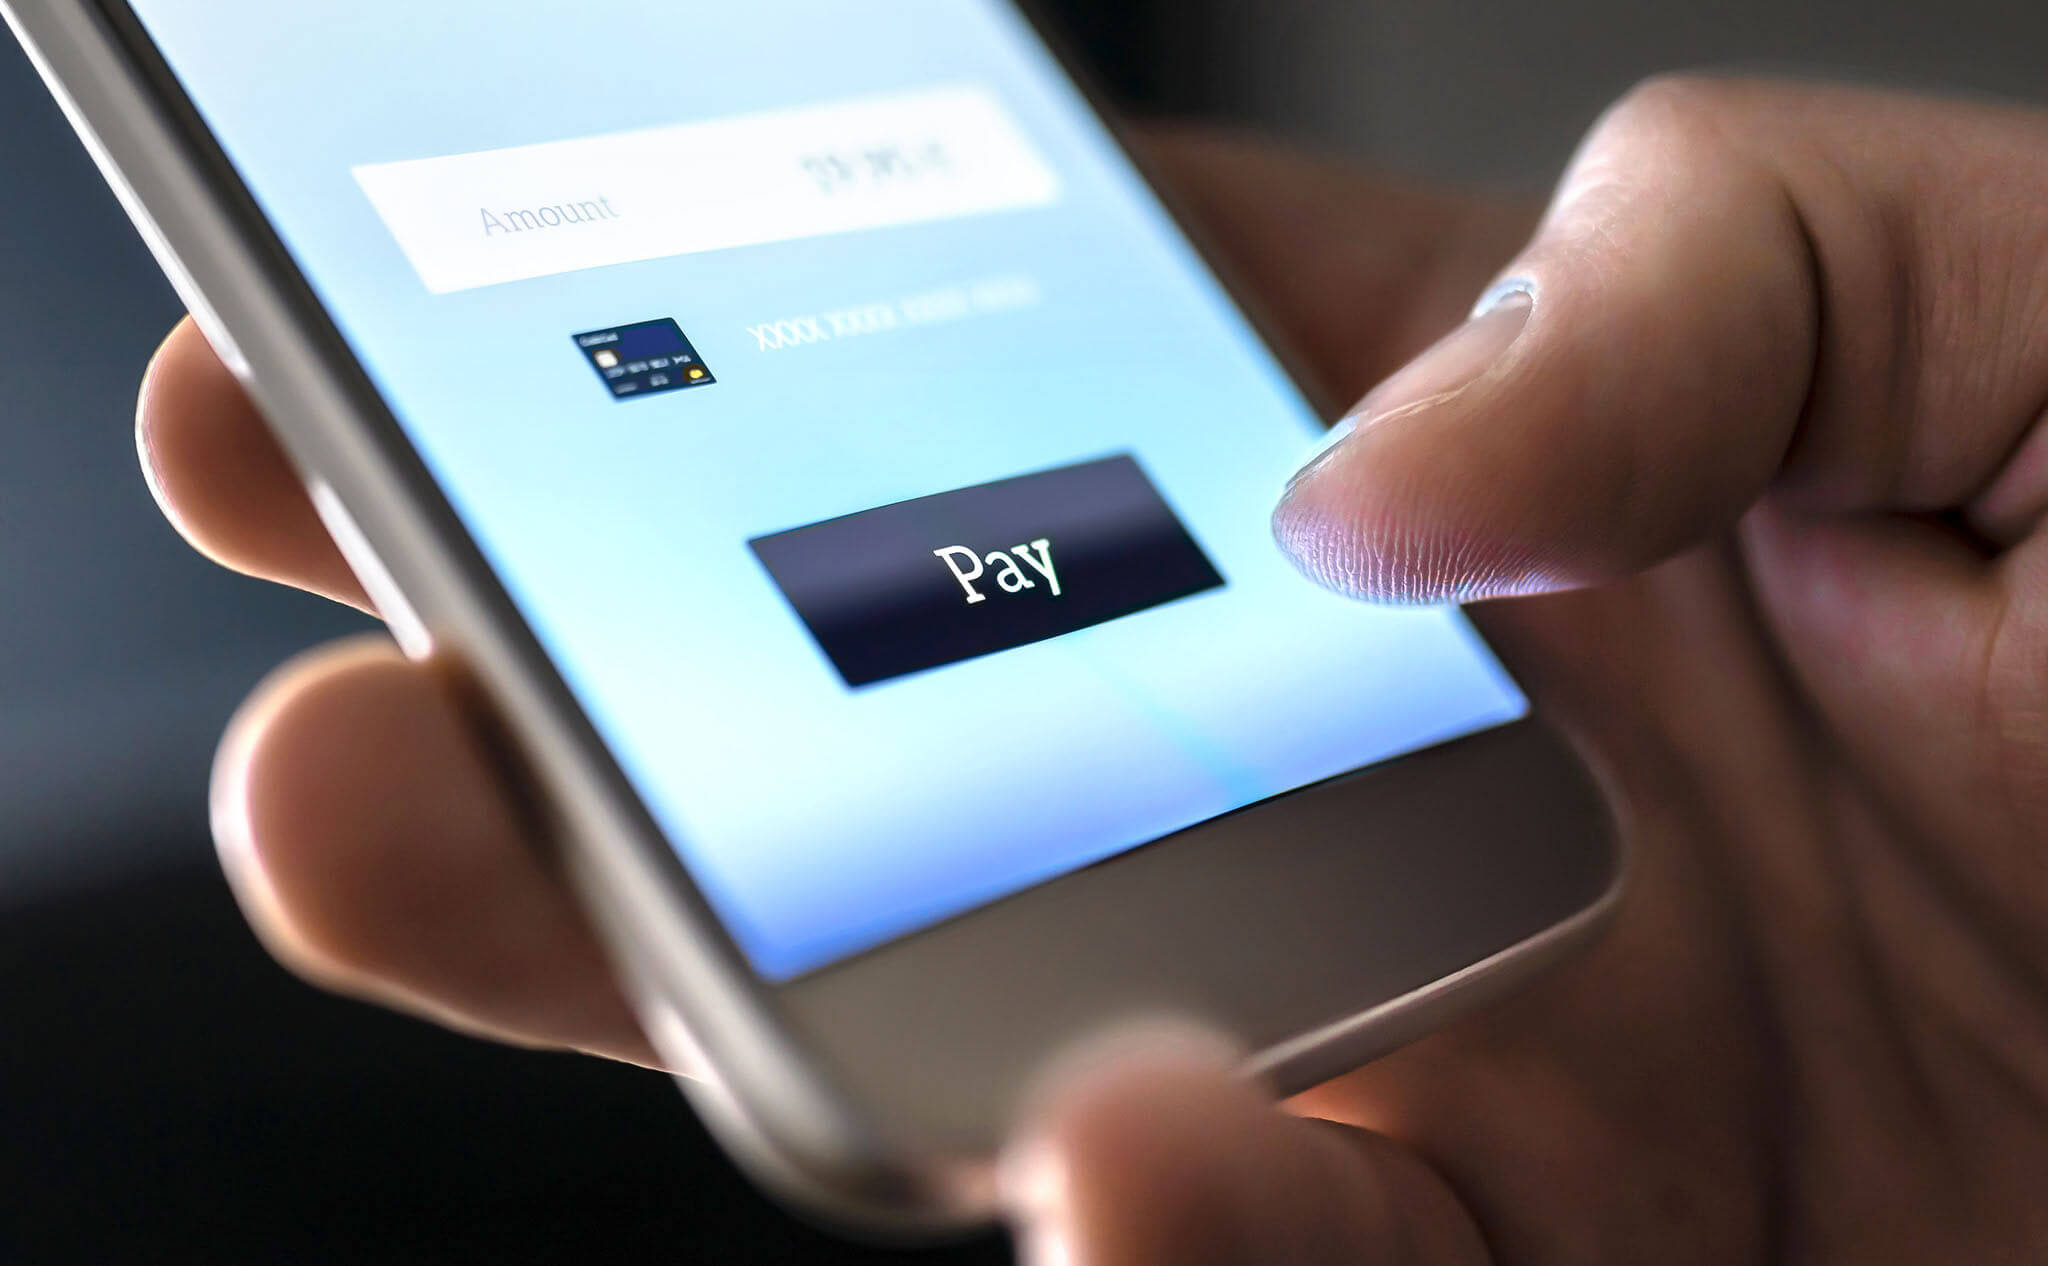 Embedded payments: Everything you need to know